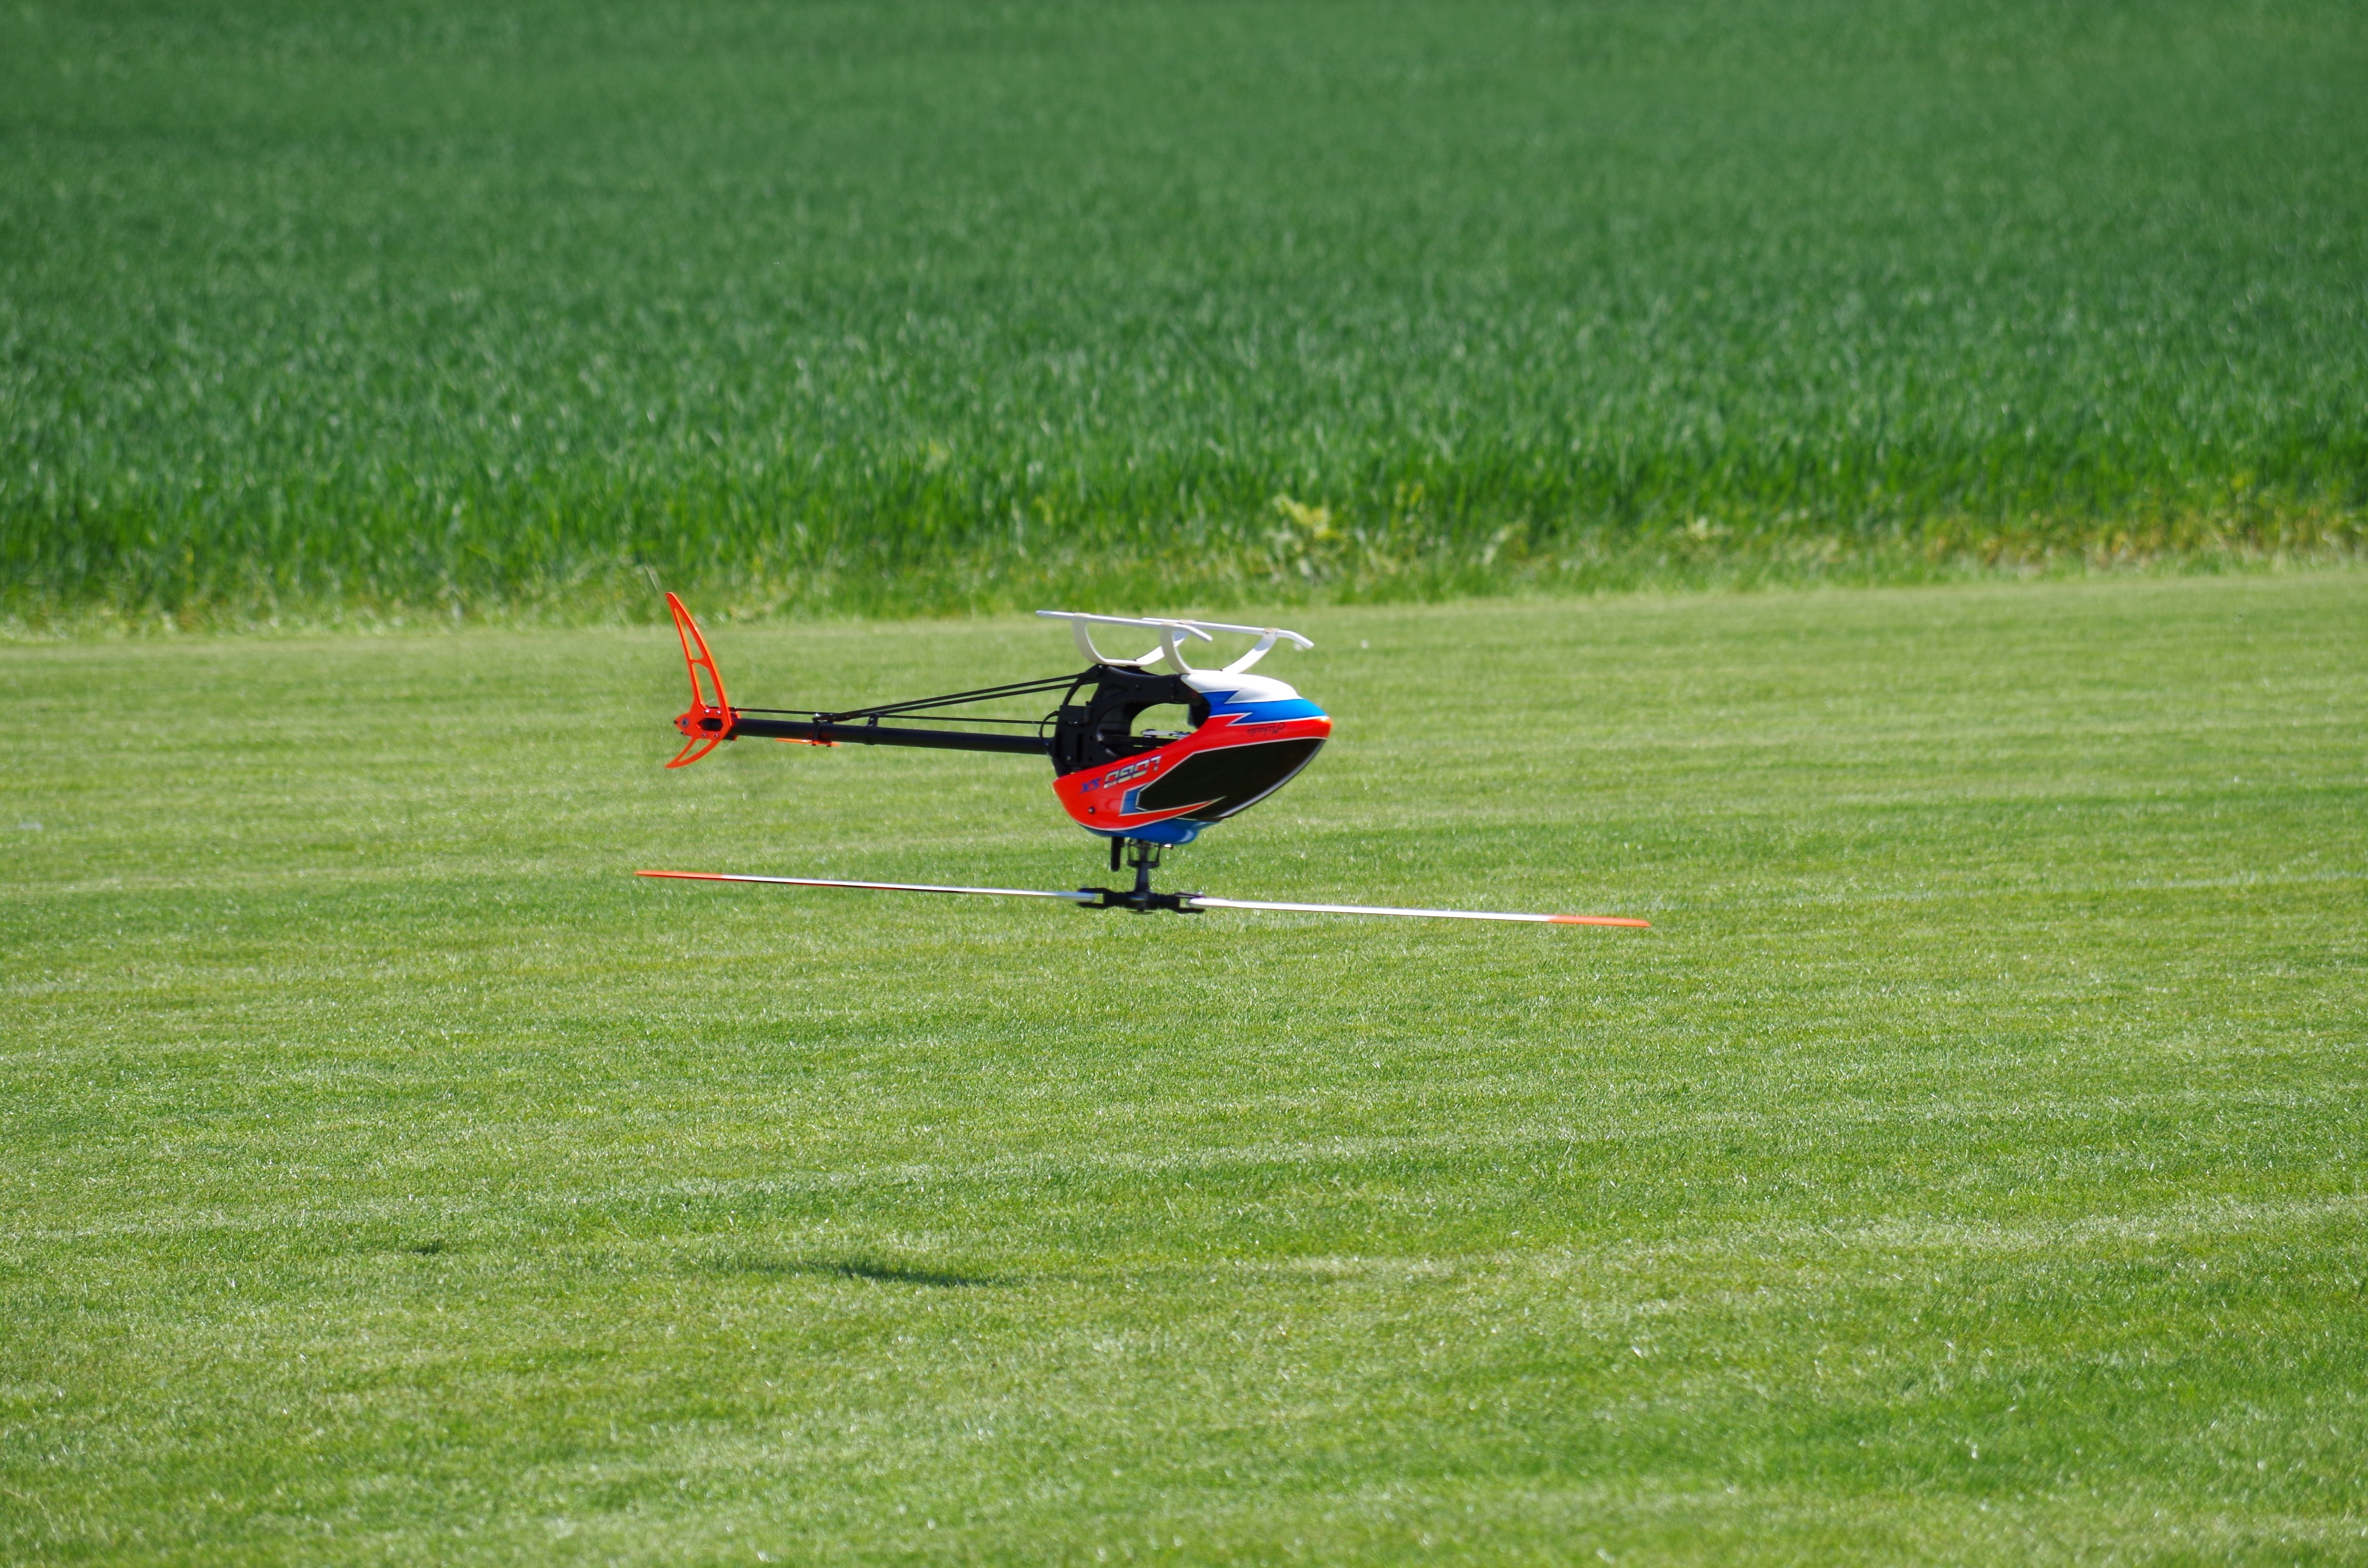 red, black and blue rc helicopter flying above green grass field during daytime